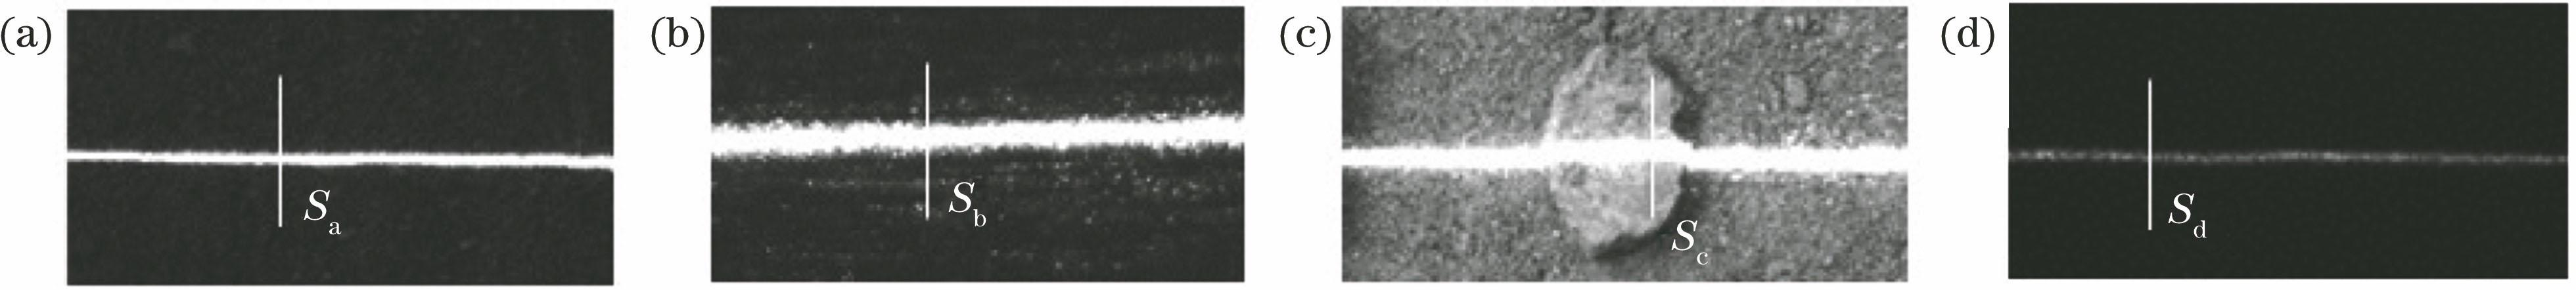 Images of line-structured light stripes. (a) Approximately ideal reflection stripe; (b) strong diffuse reflection stripe; (c) strong specular reflection stripe; (d) weak reflection stripe